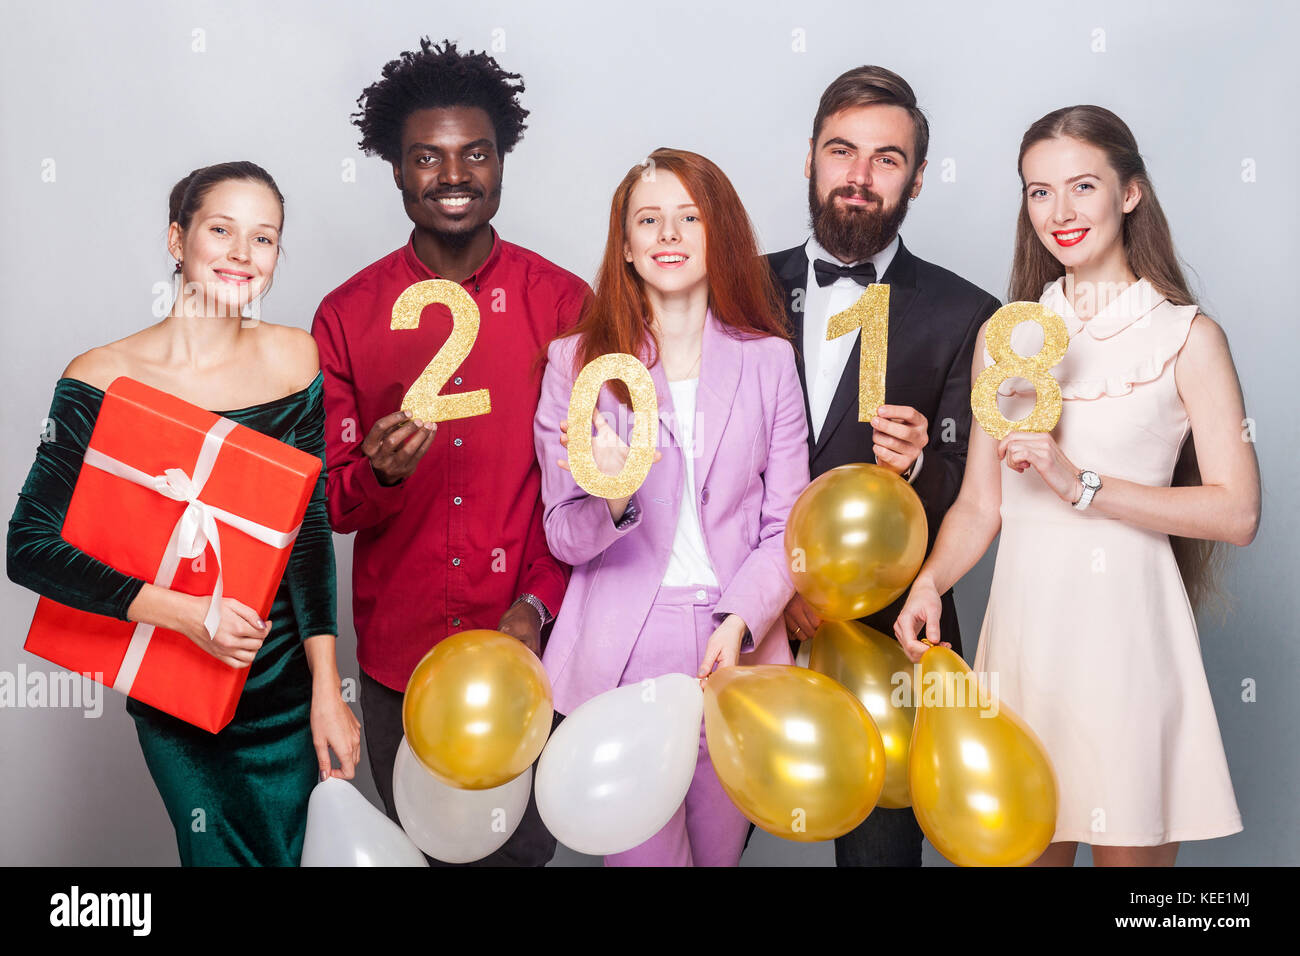 Well dressed beautiful people celebrating new year. Holding gift box, colorful air balloon and number 2018, looking at camera and smiling. Studio shot Stock Photo